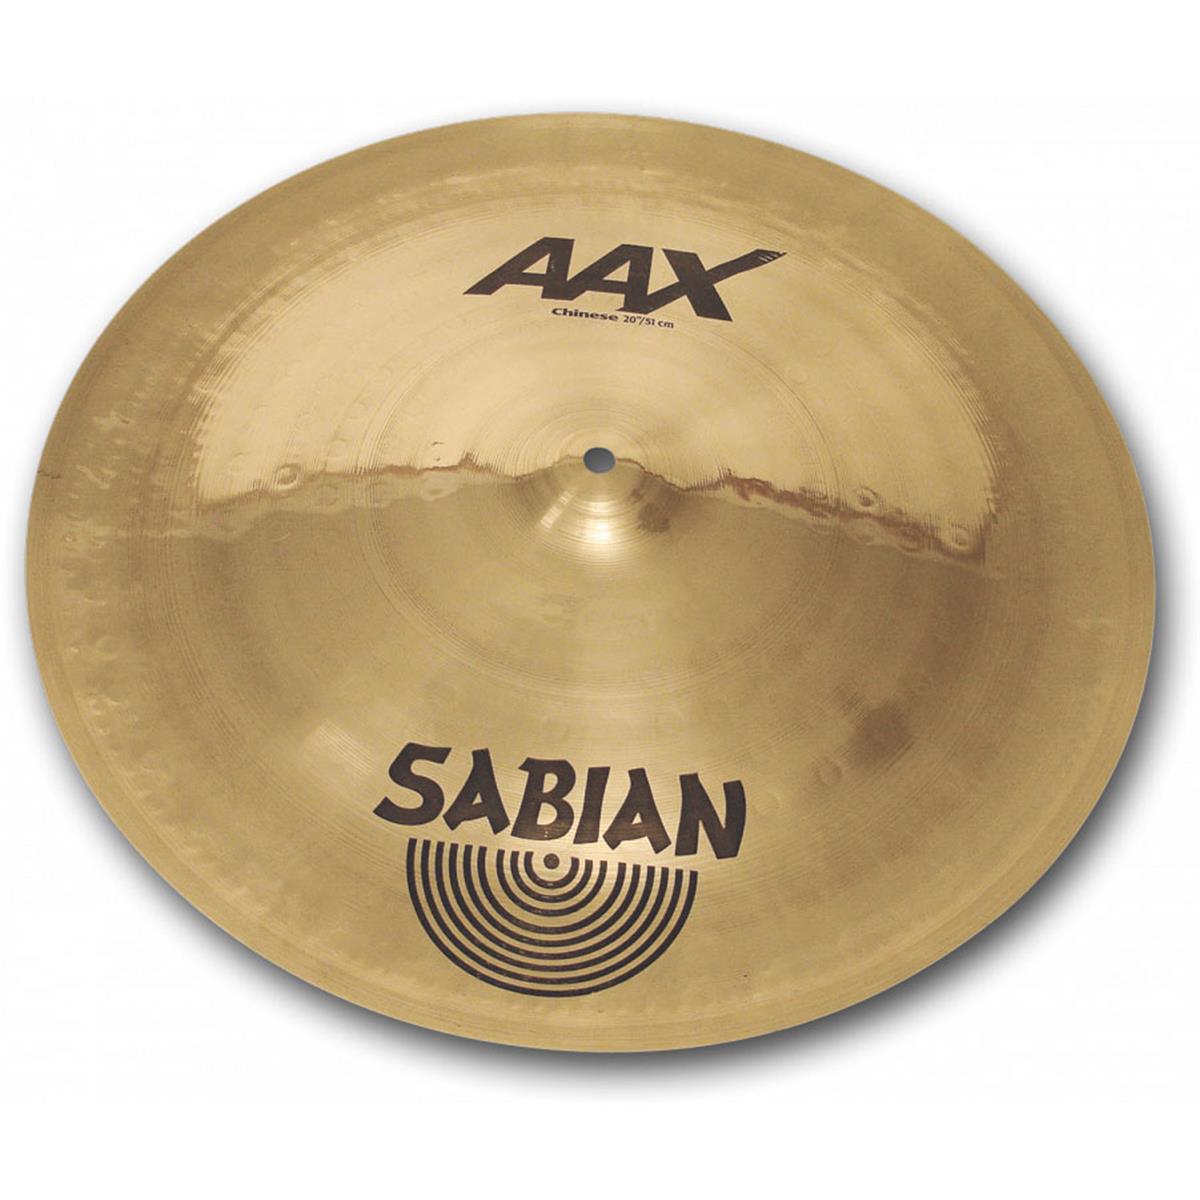 Sabian 20" AAX Chinese Cymbal, Thin, Natural/Raw Finish SABIAN 20" AAX Chinese delivers Modern Bright, biting response that is big, brash and trashy. The SABIAN AAX series delivers consistently bright, crisp, clear and cutting responses - AAX is the ultimate Modern Bright sound!